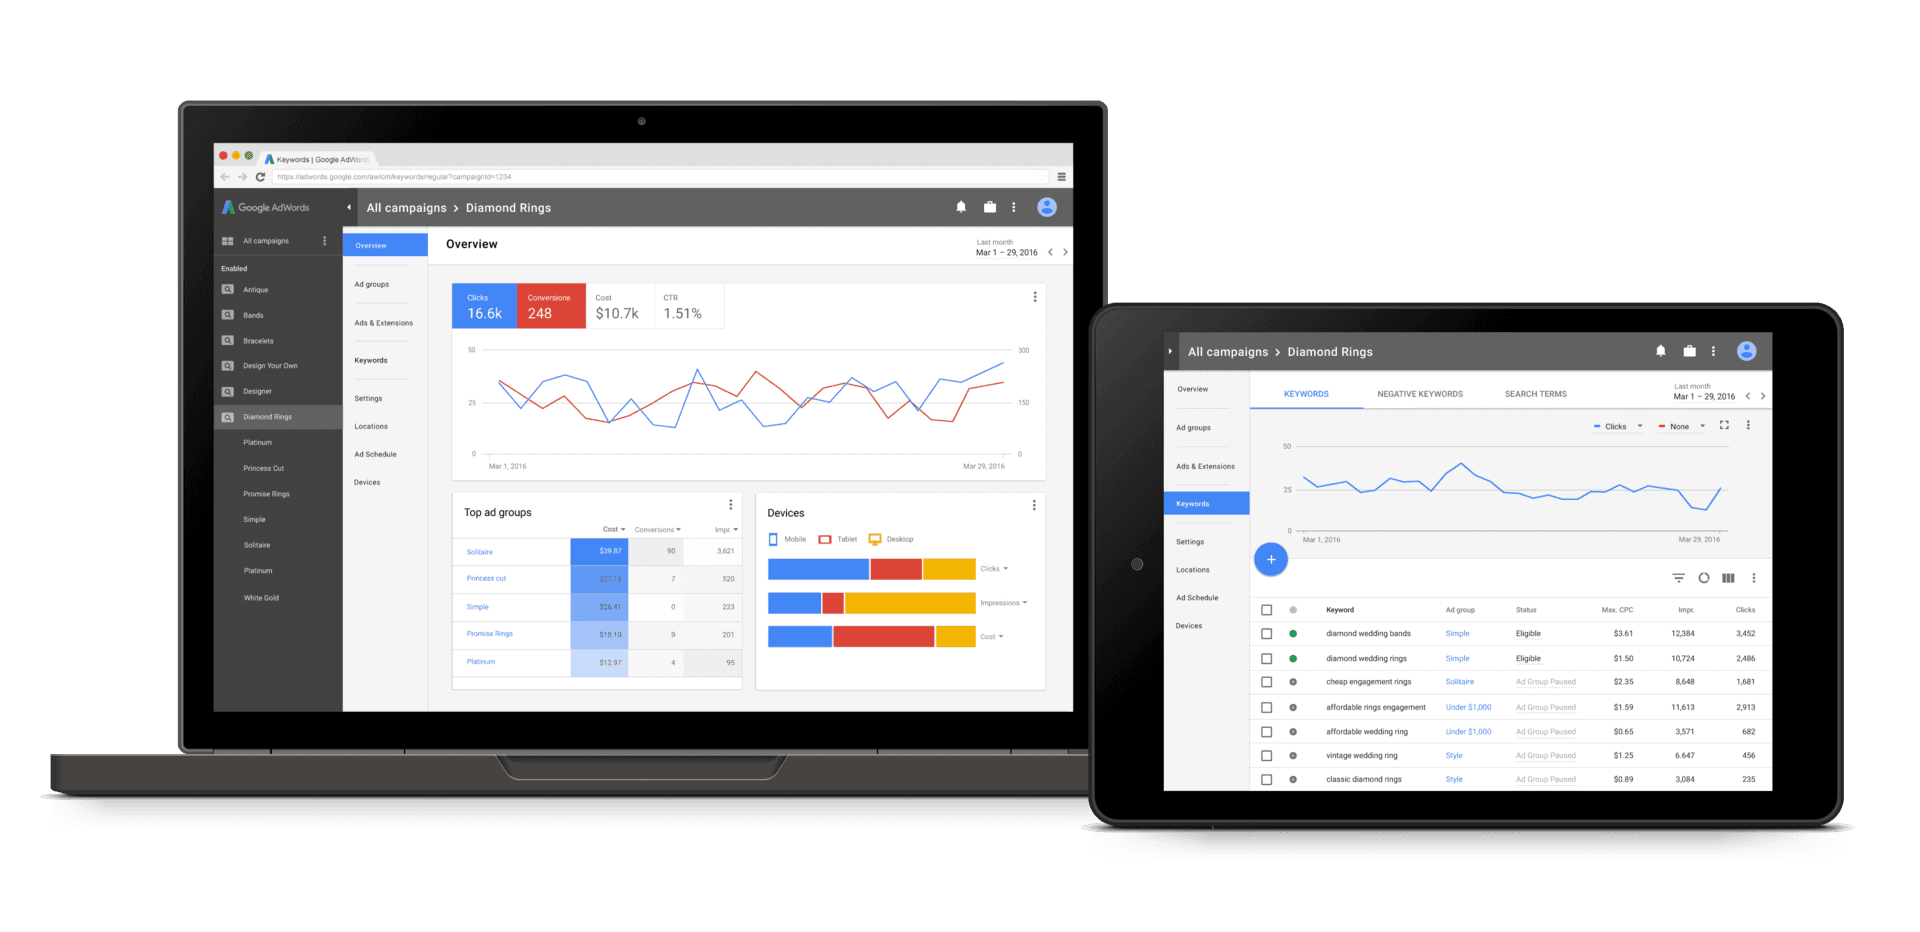 adwords experience